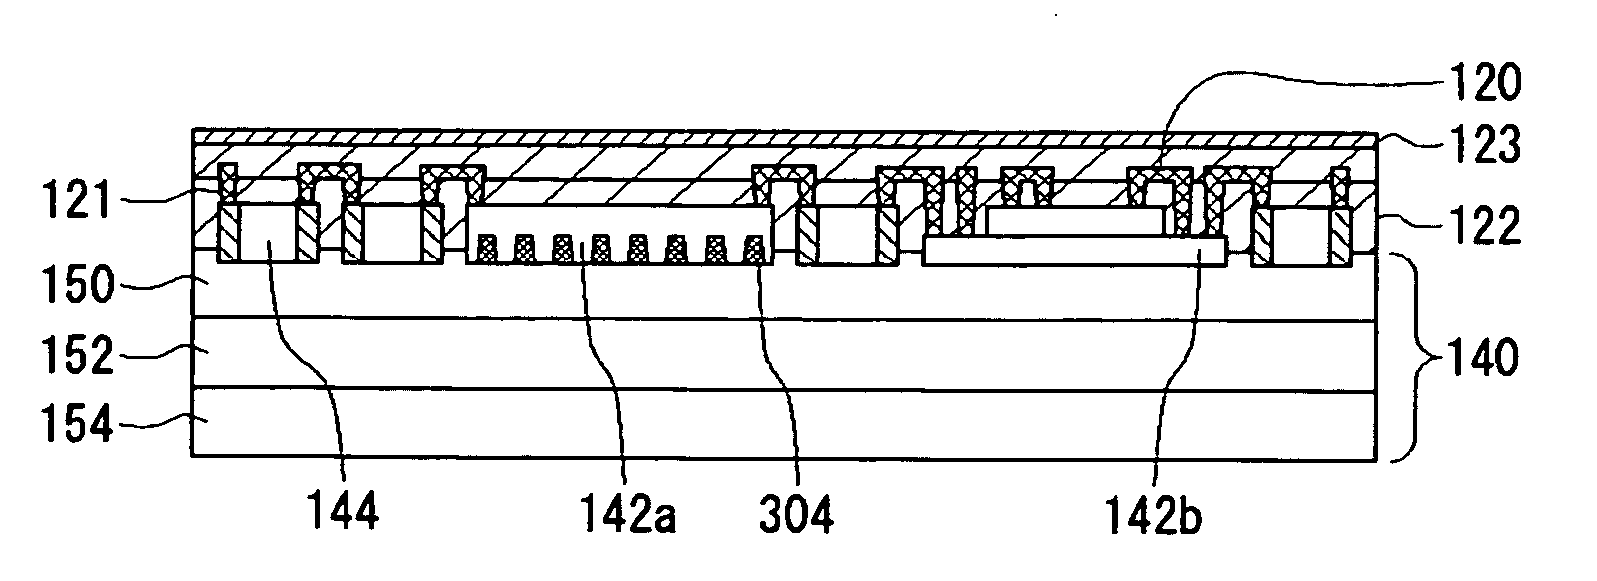 Circuit apparatus and method of manufacturing the same